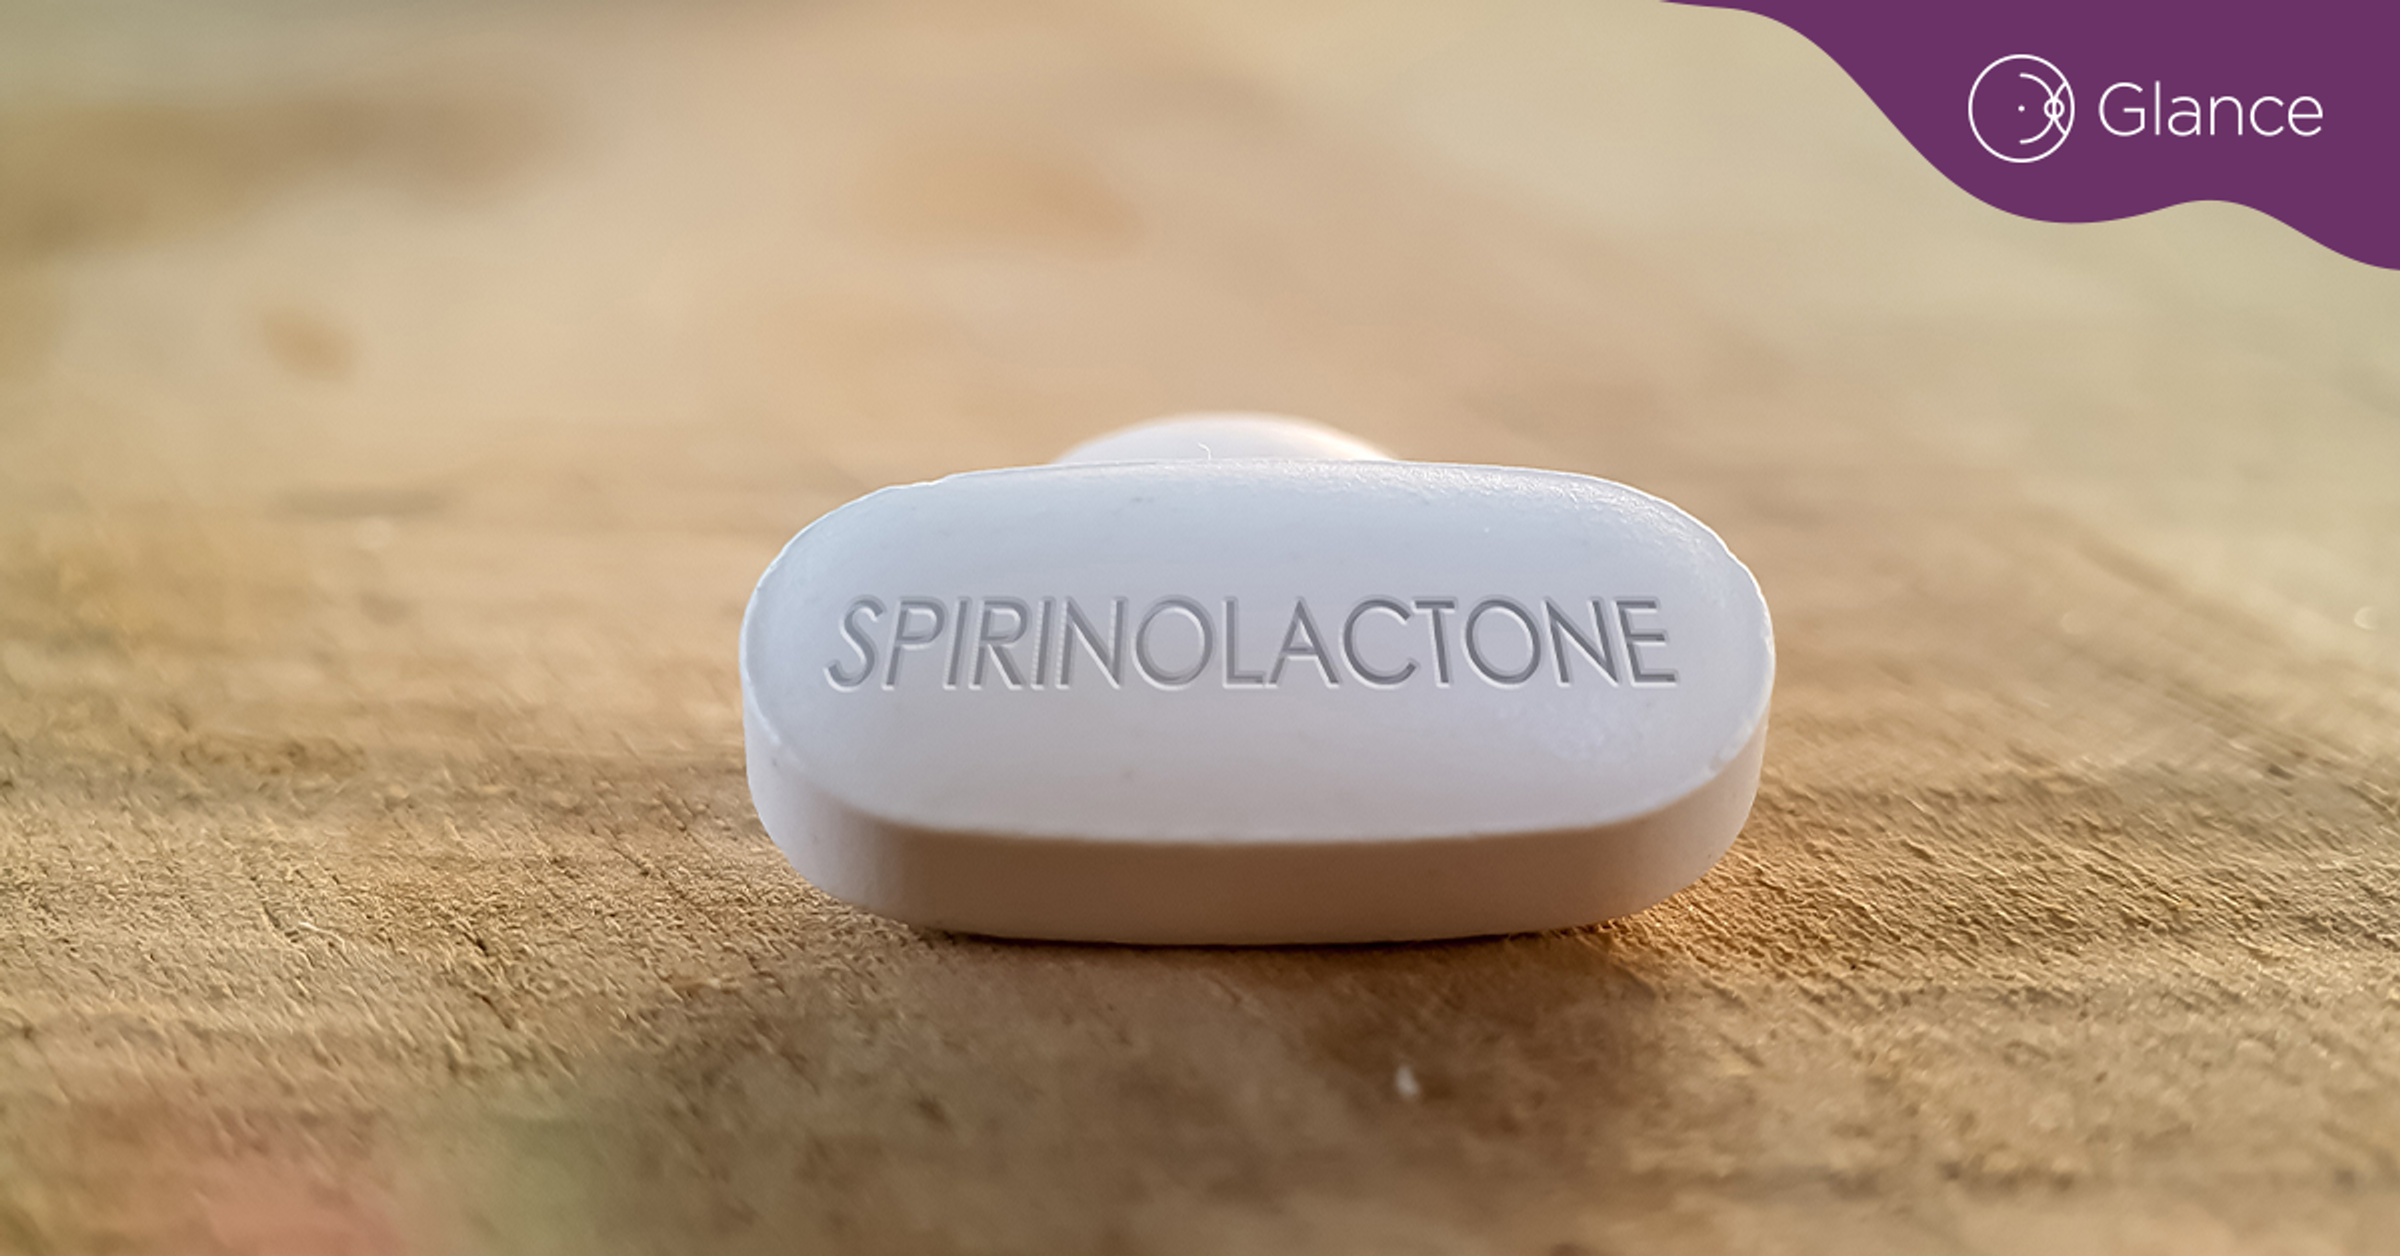 CSC may get a protected boost from spironolactone